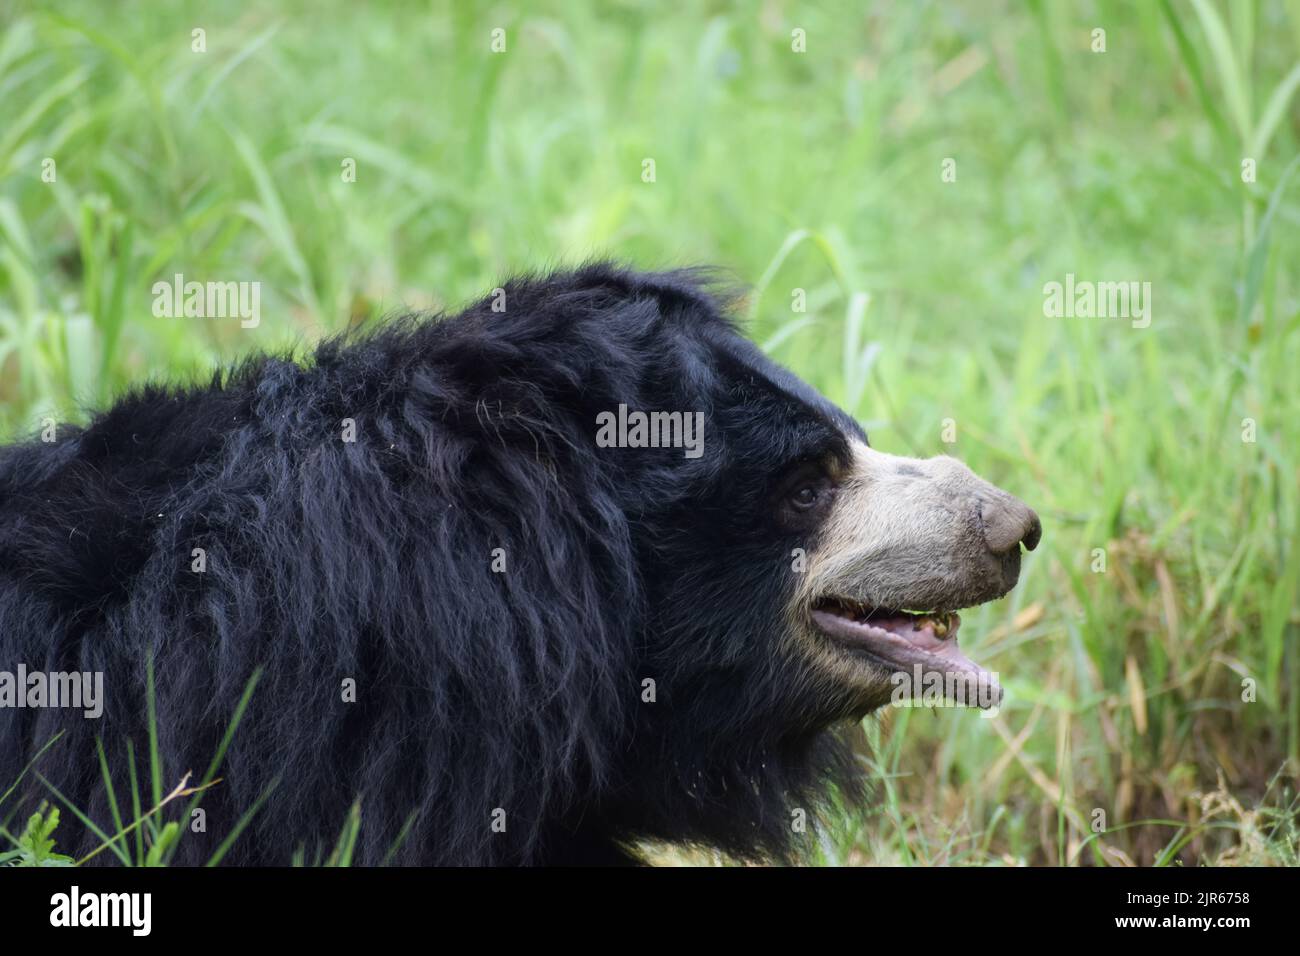 Indian bear is taking rest on grass field at wildlife sanctuary. Stock Photo